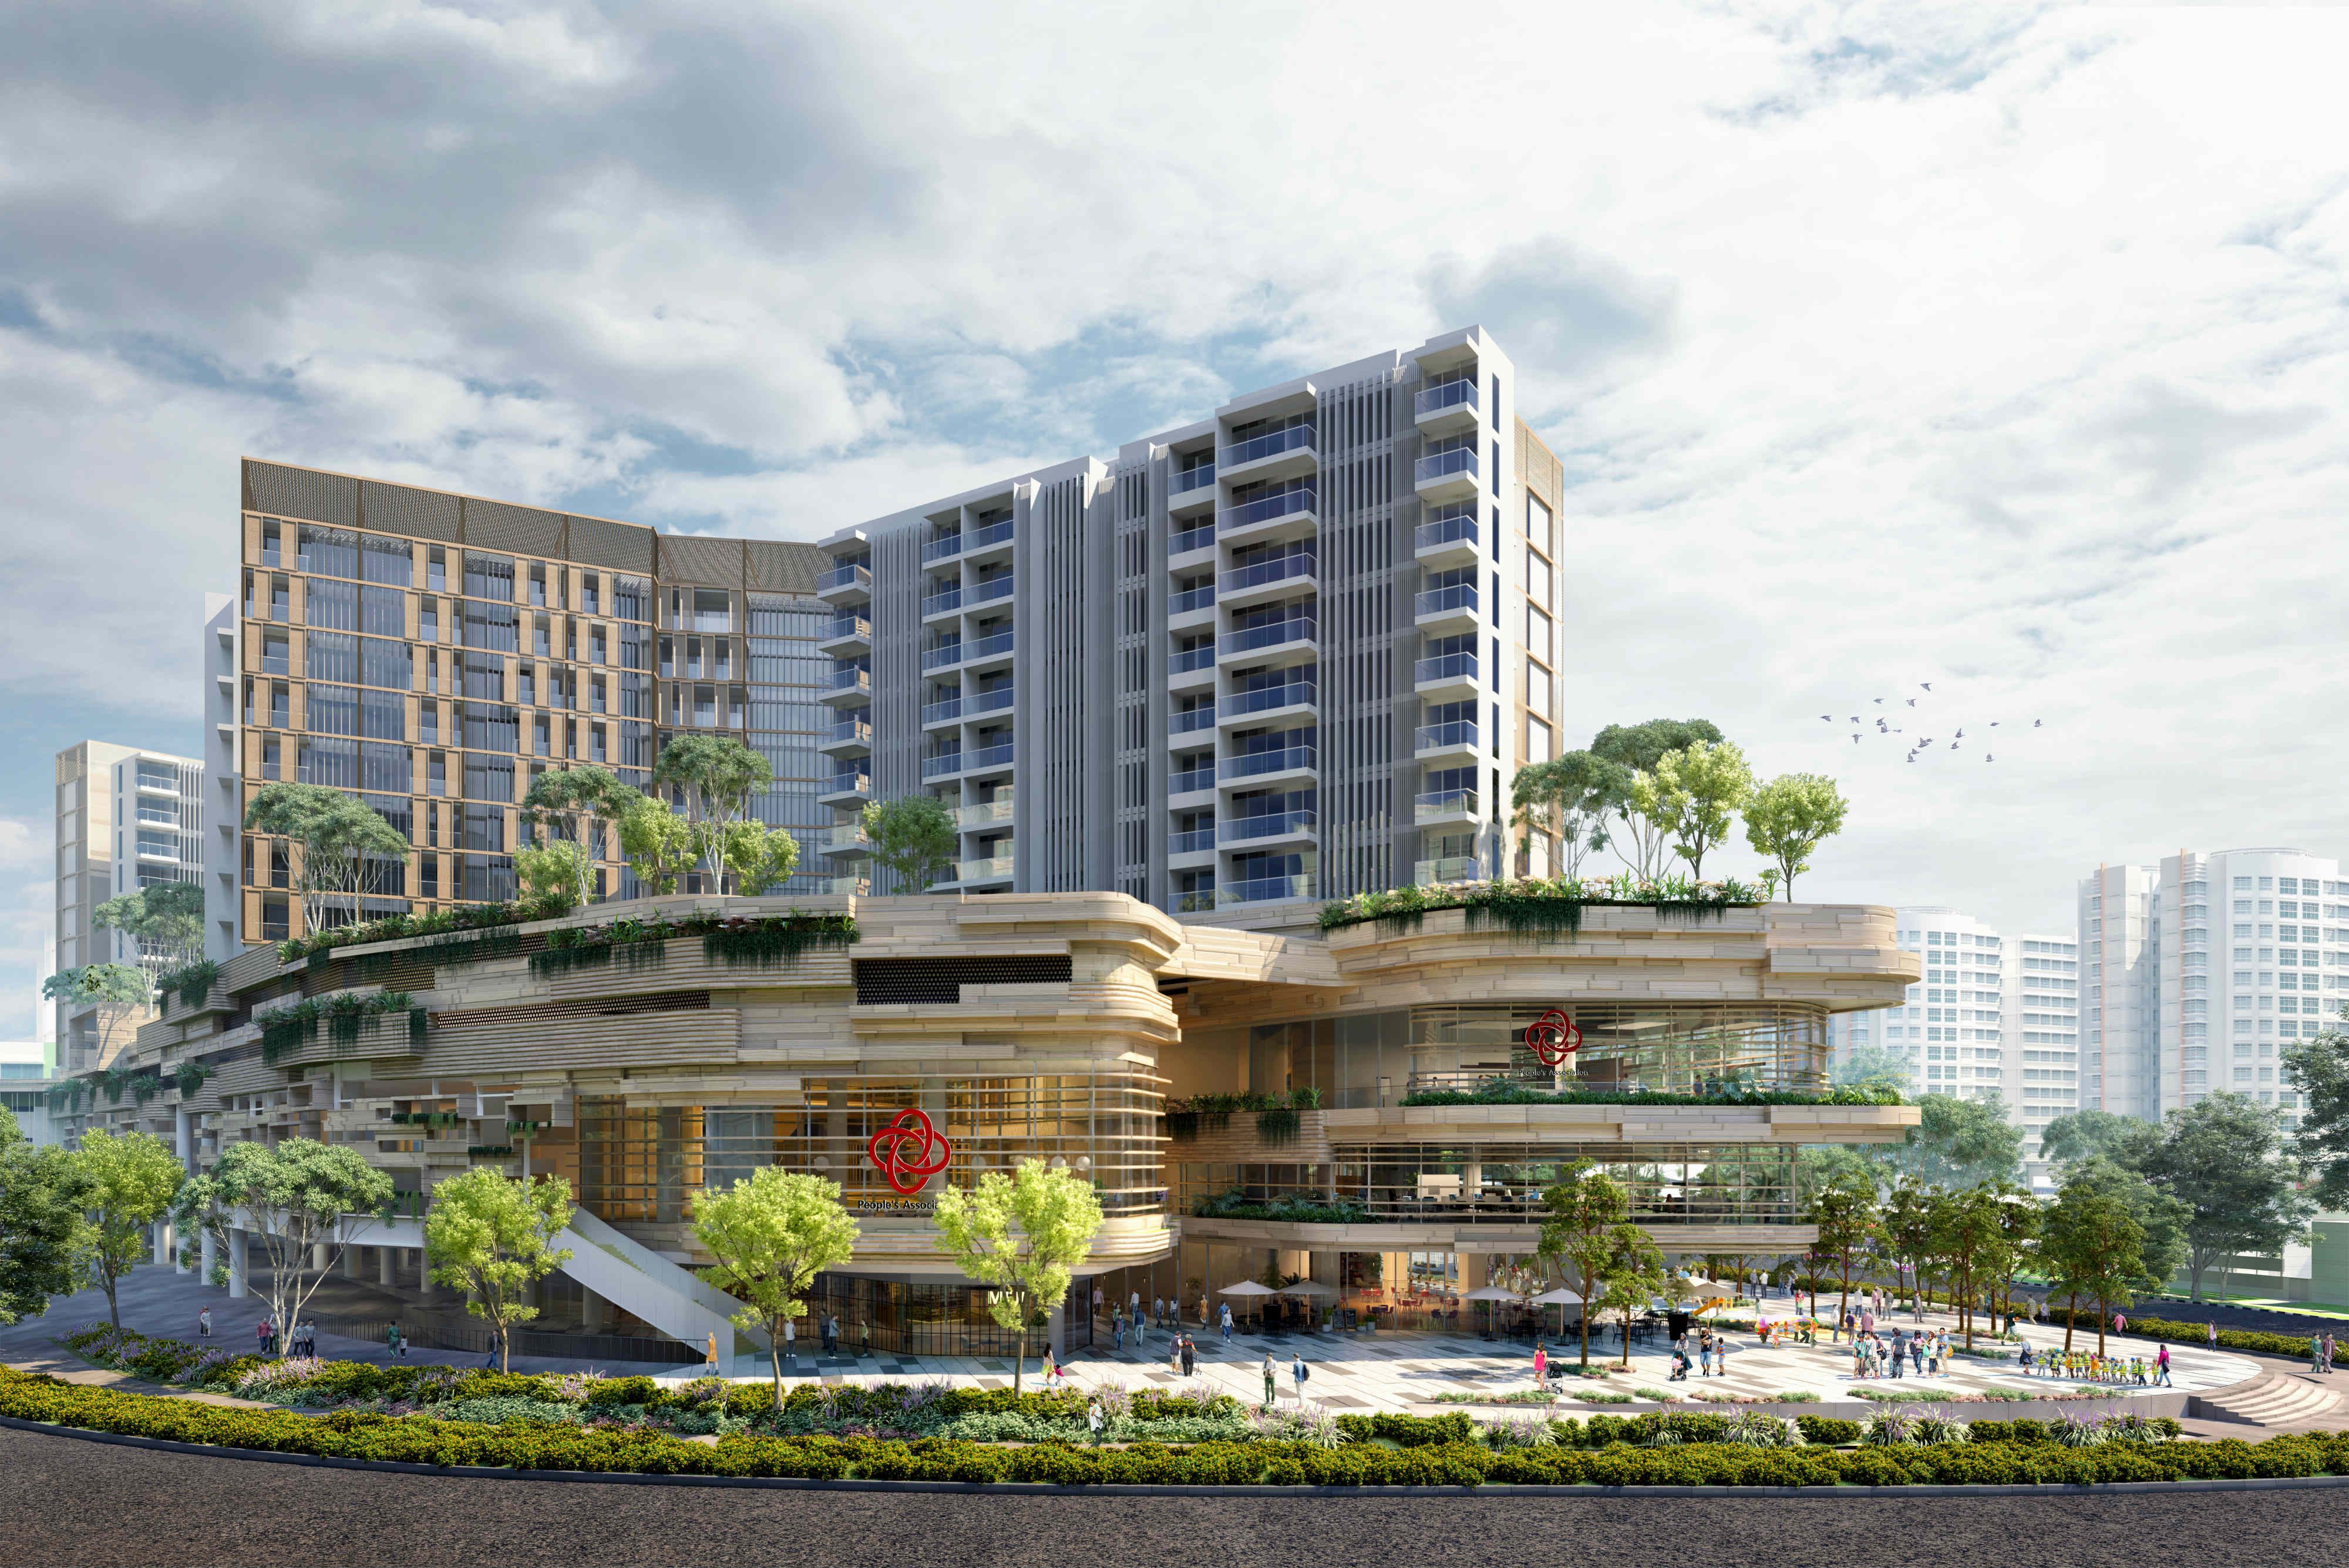 CapitaLand-CDL JV acquires prime site in SG's Sengkang Central for $565m